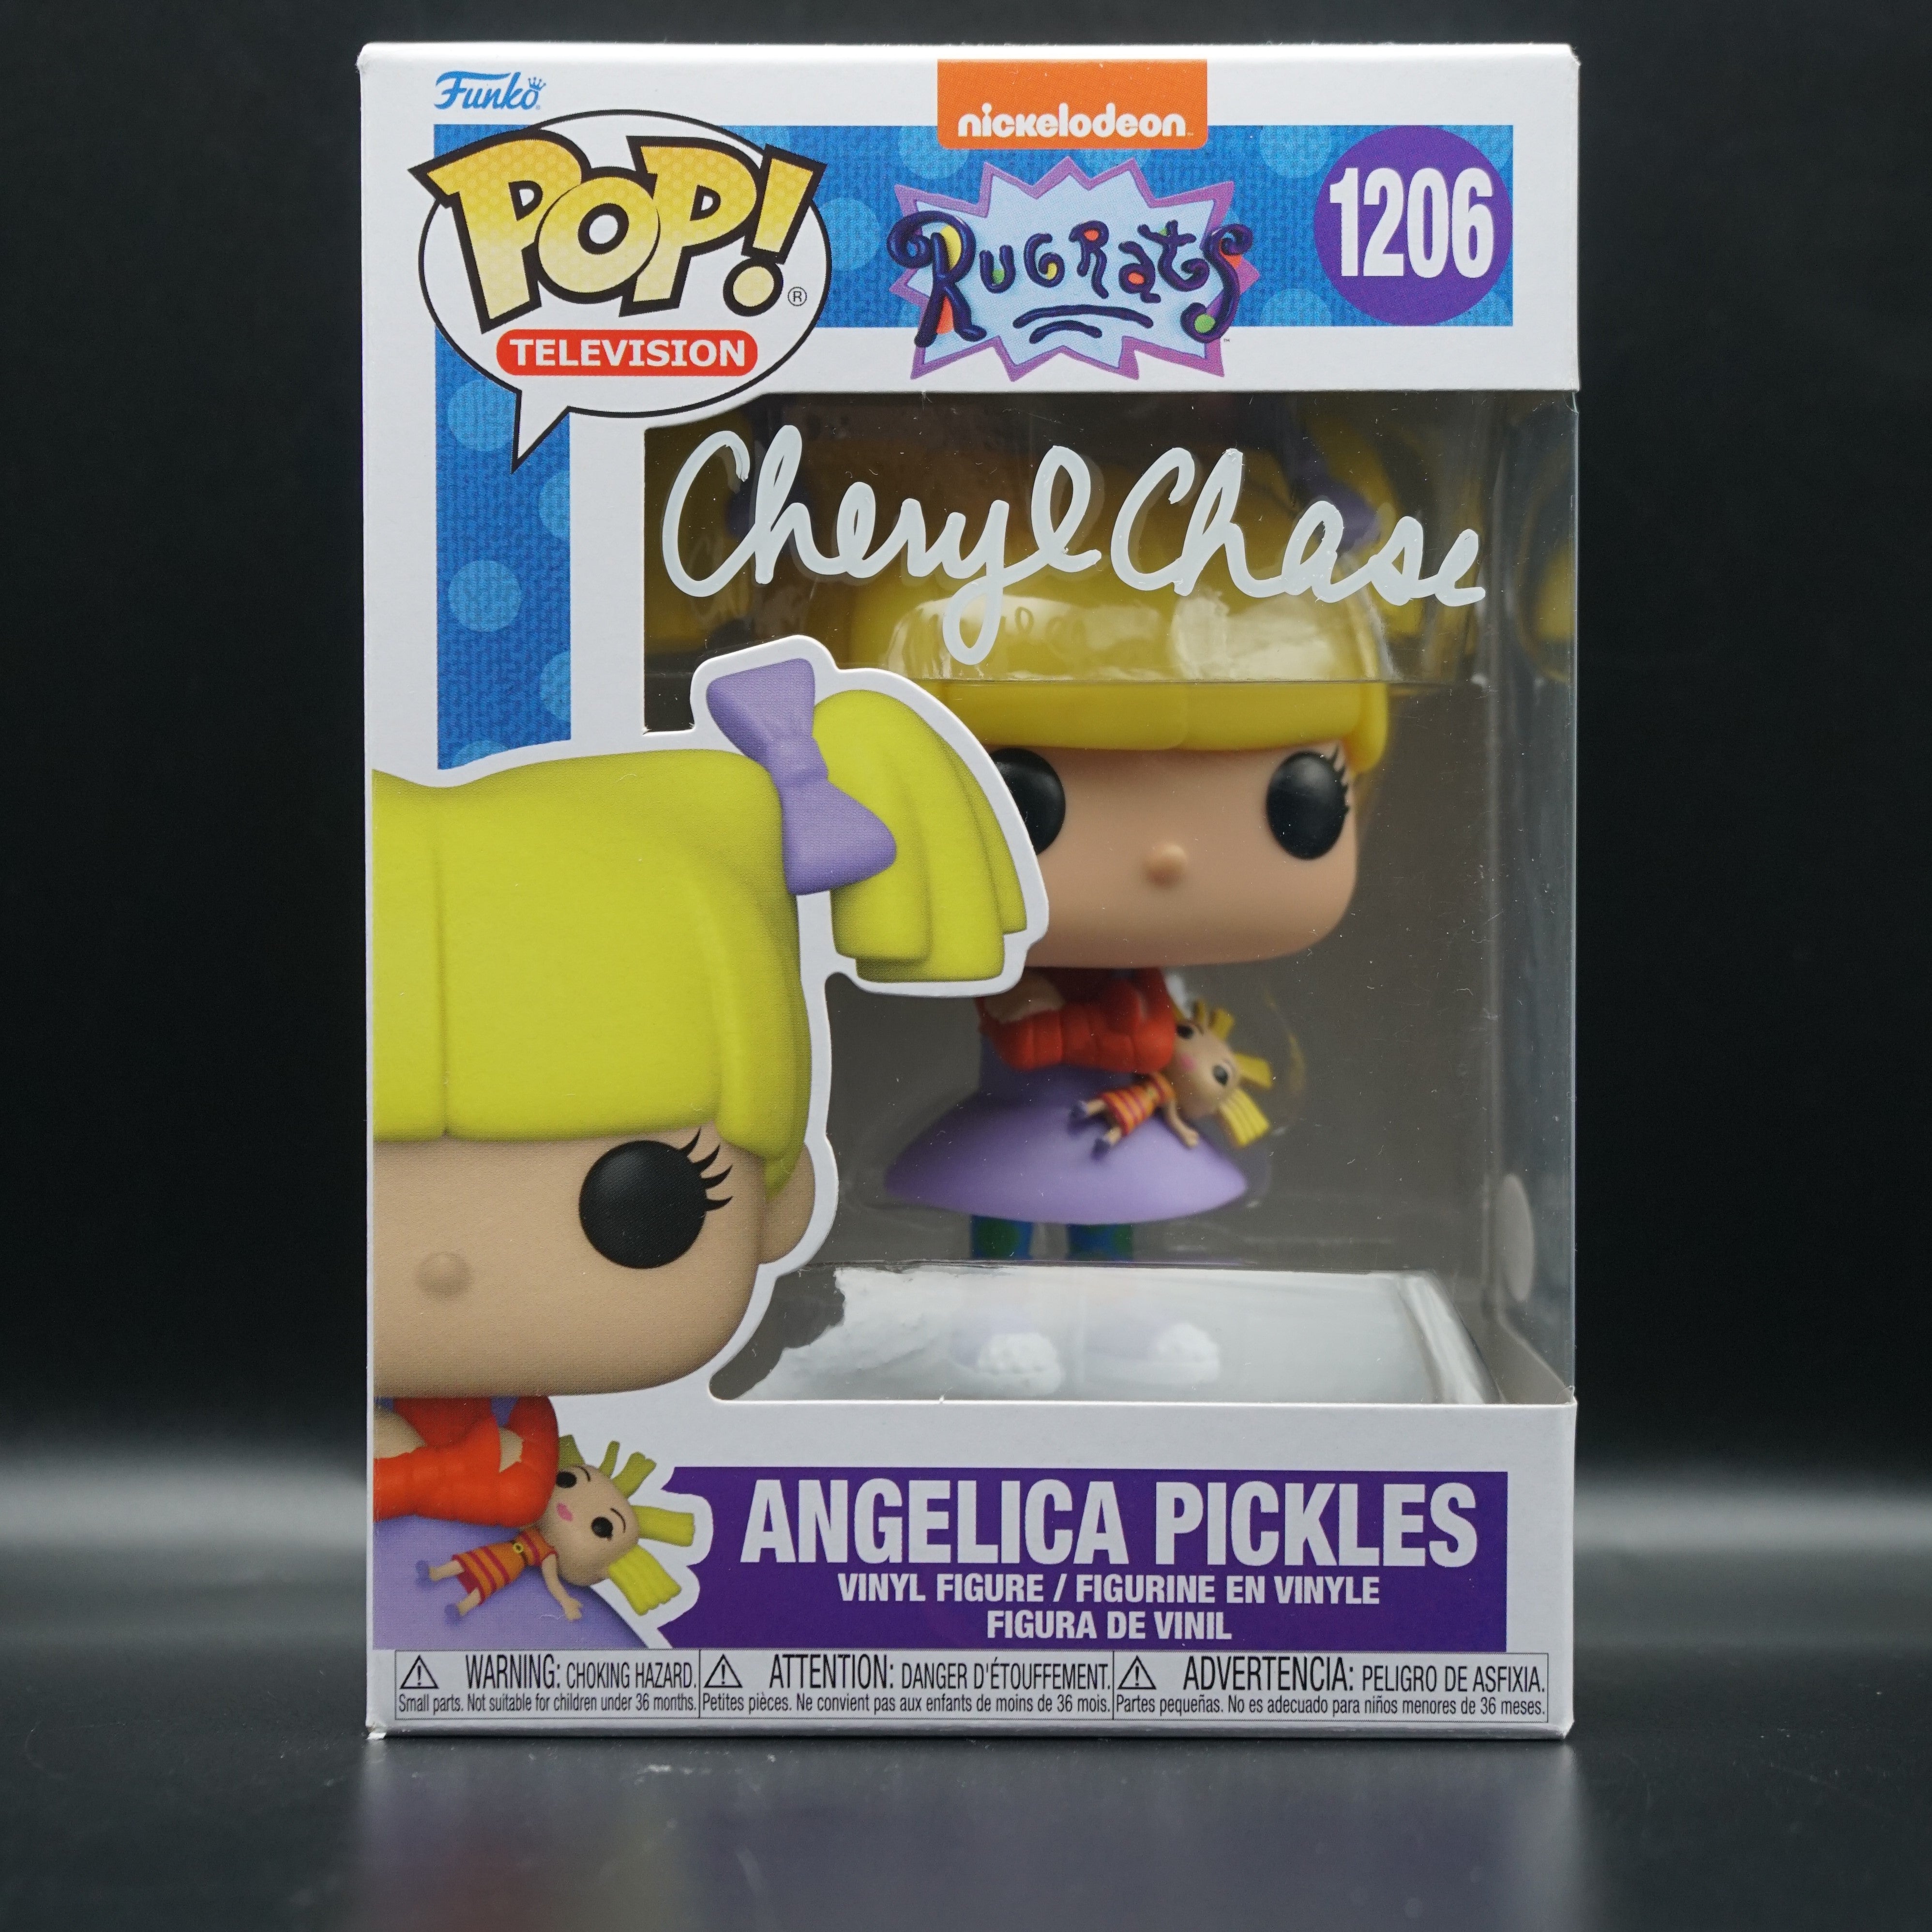 Rugrats Funko Pop #1206 Angelica Pickles from Nickelodeon Cartoon PSA COA - Signed by Cheryl Chase